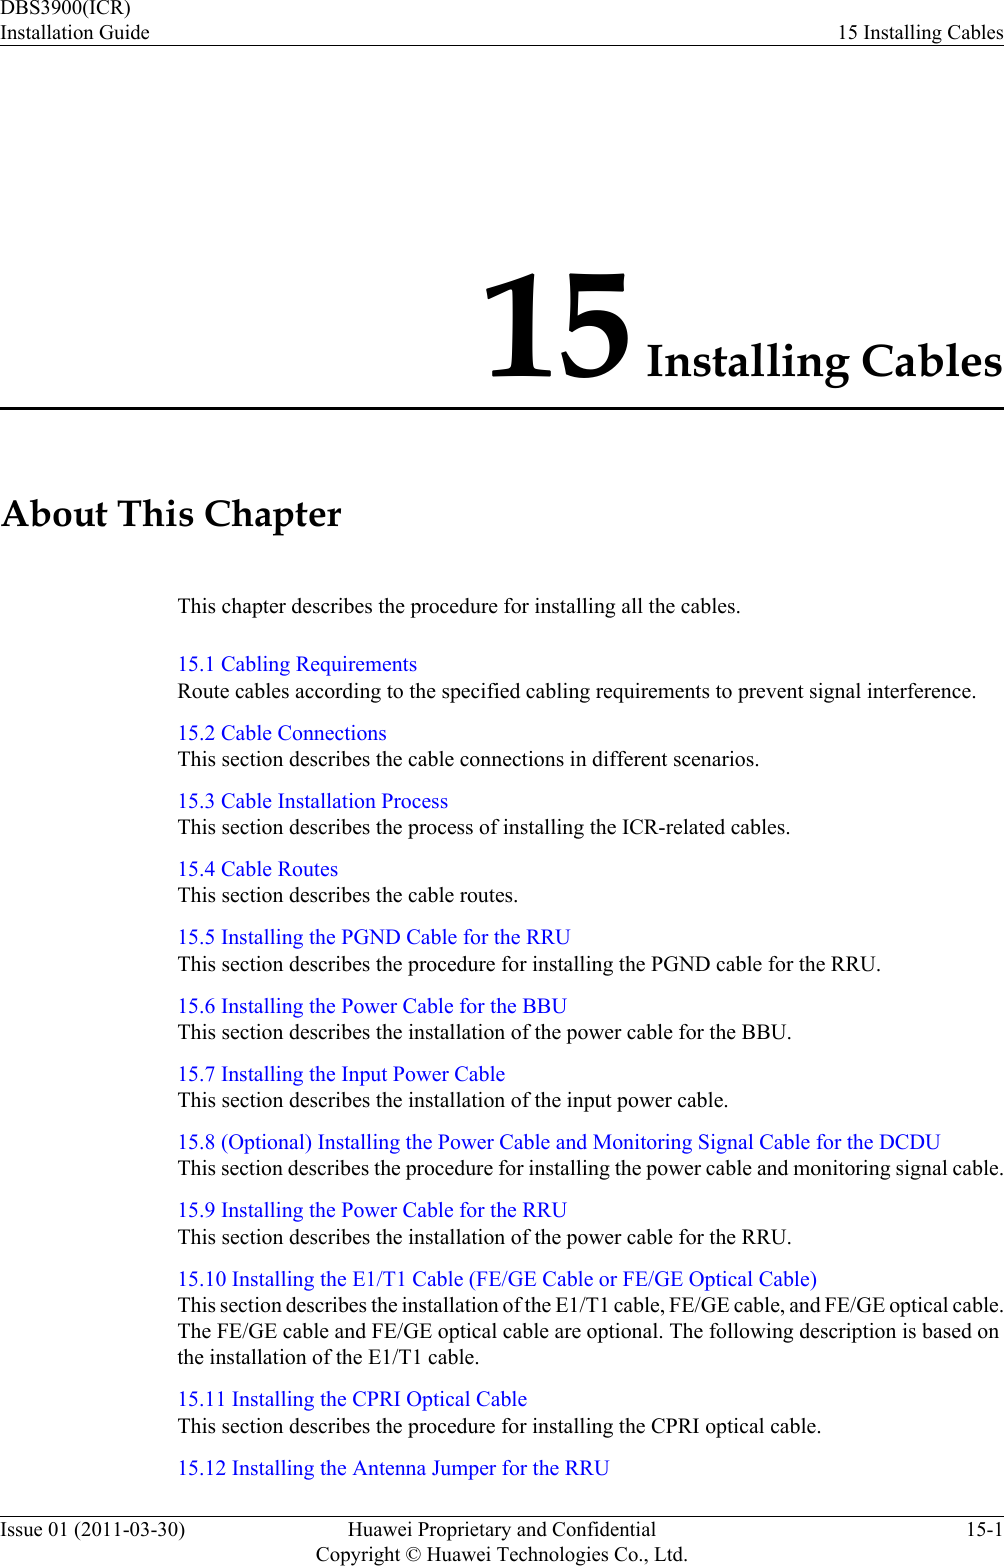 15 Installing CablesAbout This ChapterThis chapter describes the procedure for installing all the cables.15.1 Cabling RequirementsRoute cables according to the specified cabling requirements to prevent signal interference.15.2 Cable ConnectionsThis section describes the cable connections in different scenarios.15.3 Cable Installation ProcessThis section describes the process of installing the ICR-related cables.15.4 Cable RoutesThis section describes the cable routes.15.5 Installing the PGND Cable for the RRUThis section describes the procedure for installing the PGND cable for the RRU.15.6 Installing the Power Cable for the BBUThis section describes the installation of the power cable for the BBU.15.7 Installing the Input Power CableThis section describes the installation of the input power cable.15.8 (Optional) Installing the Power Cable and Monitoring Signal Cable for the DCDUThis section describes the procedure for installing the power cable and monitoring signal cable.15.9 Installing the Power Cable for the RRUThis section describes the installation of the power cable for the RRU.15.10 Installing the E1/T1 Cable (FE/GE Cable or FE/GE Optical Cable)This section describes the installation of the E1/T1 cable, FE/GE cable, and FE/GE optical cable.The FE/GE cable and FE/GE optical cable are optional. The following description is based onthe installation of the E1/T1 cable.15.11 Installing the CPRI Optical CableThis section describes the procedure for installing the CPRI optical cable.15.12 Installing the Antenna Jumper for the RRUDBS3900(ICR)Installation Guide 15 Installing CablesIssue 01 (2011-03-30) Huawei Proprietary and ConfidentialCopyright © Huawei Technologies Co., Ltd.15-1